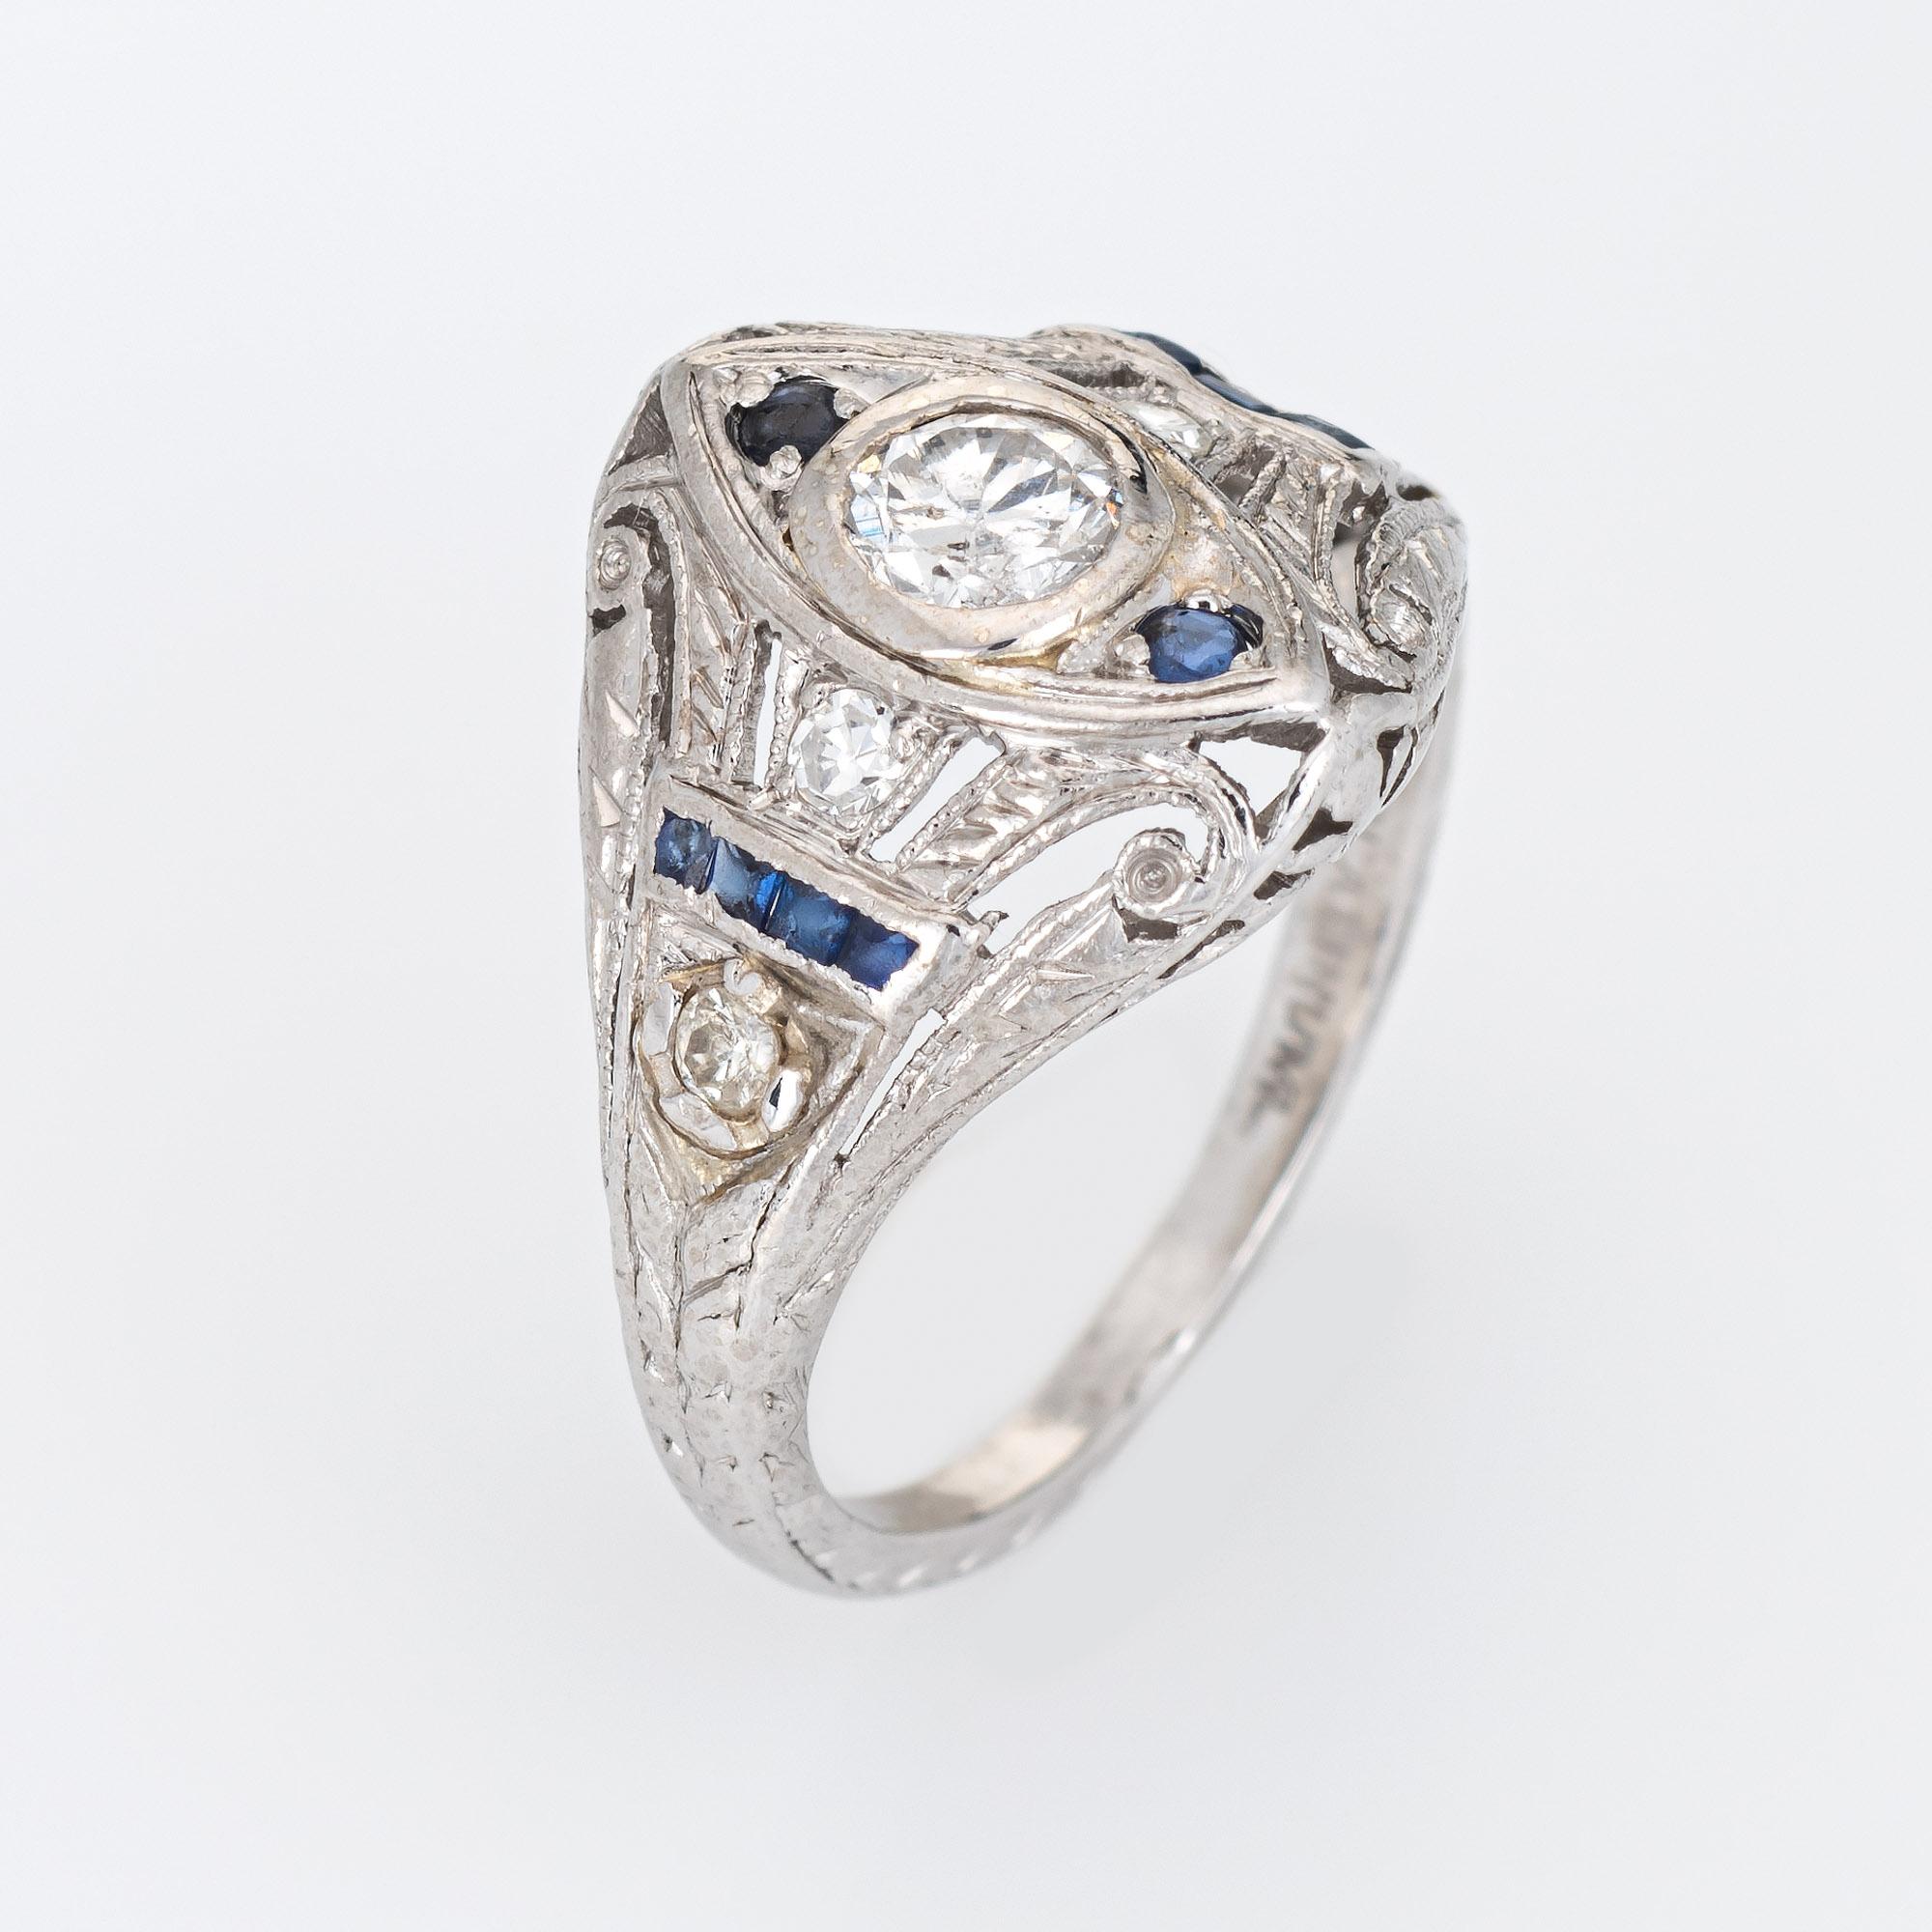 Finely detailed vintage Art Deco era diamond & sapphire ring (circa 1920s to 1930s) crafted in 900 platinum. 

Centrally mounted estimated 0.20 carat Old European cut diamond is accented with four estimated 0.01 carat single cut diamonds. The total